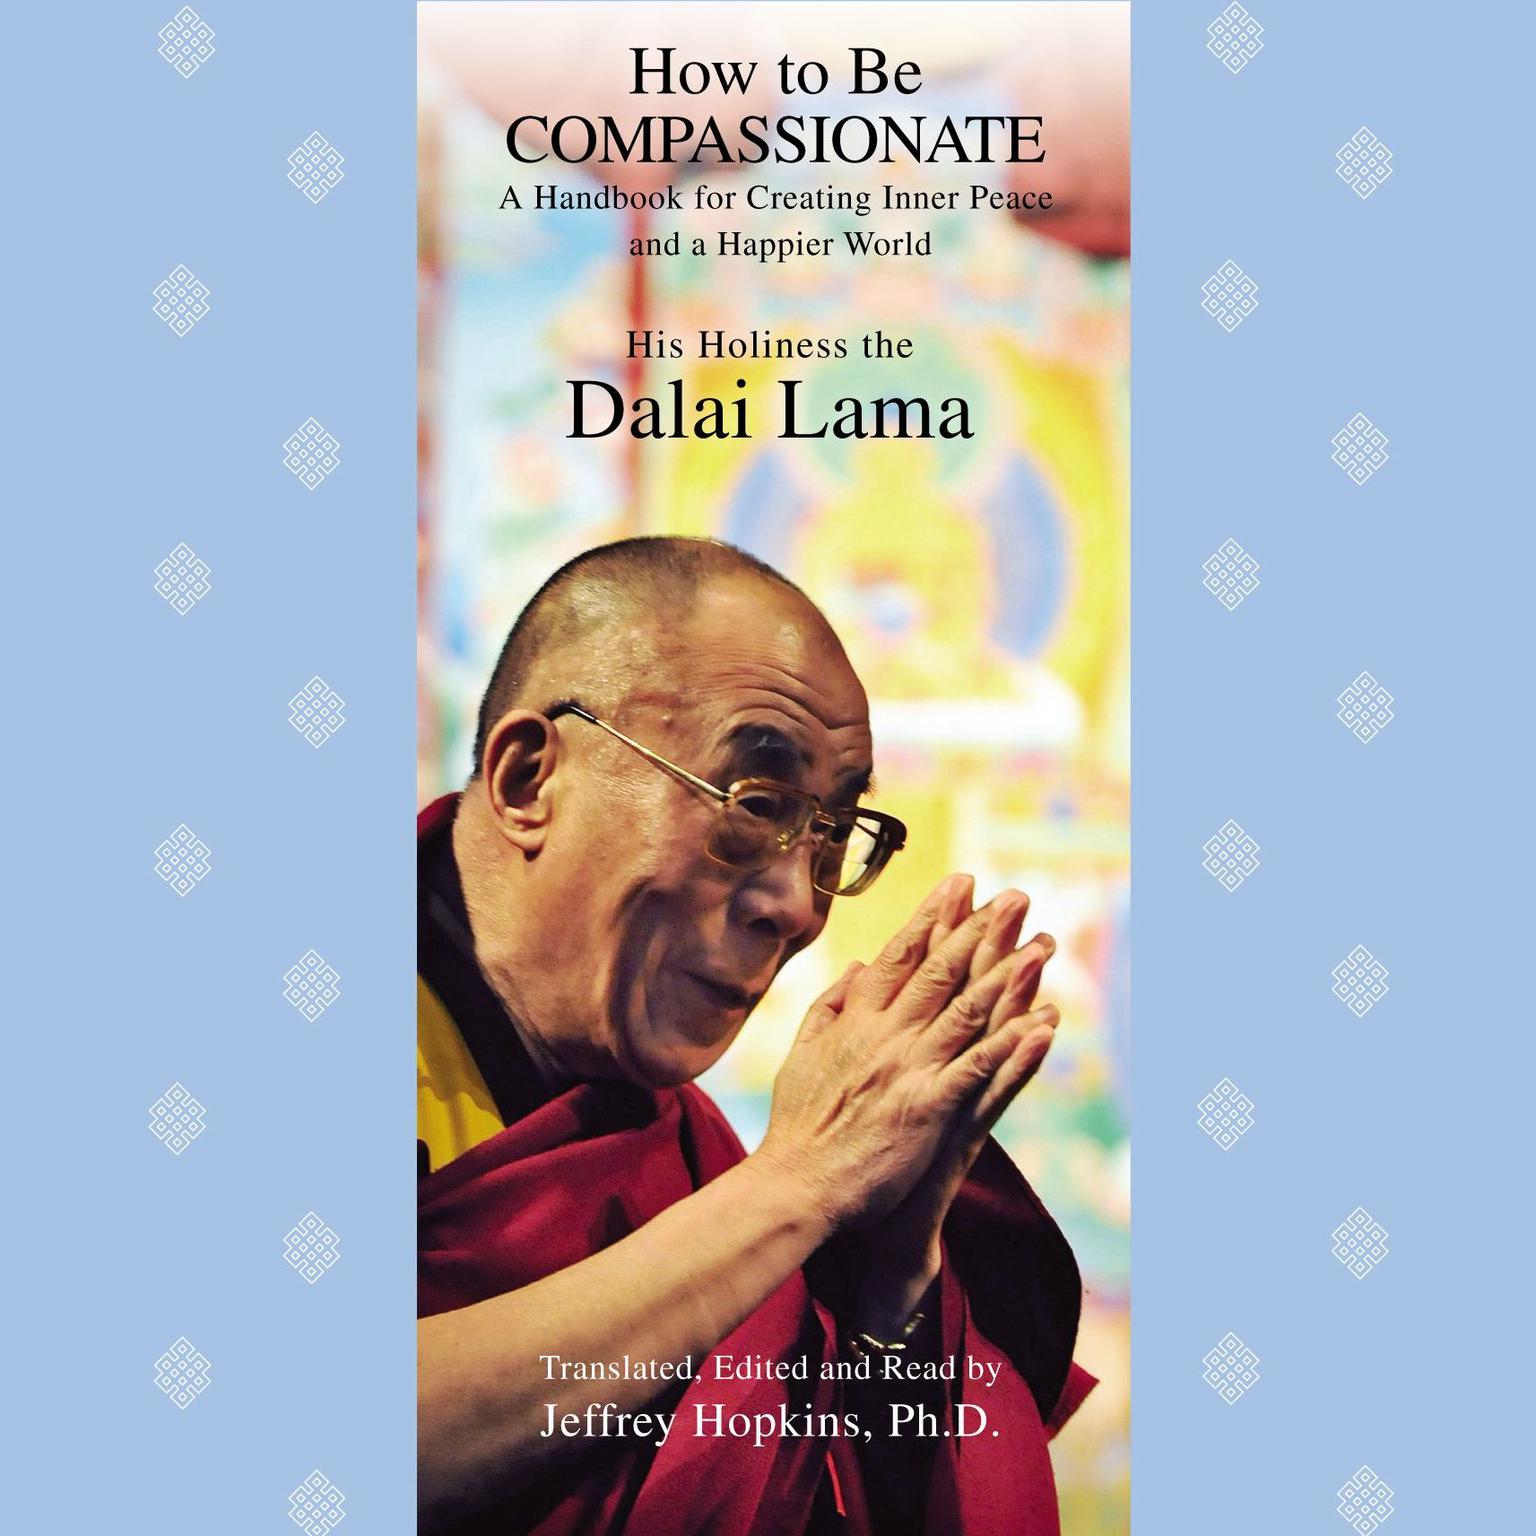 How to Be Compassionate: A Handbook for Creating Inner Peace and a Happier World Audiobook, by His Holiness the Dalai Lama